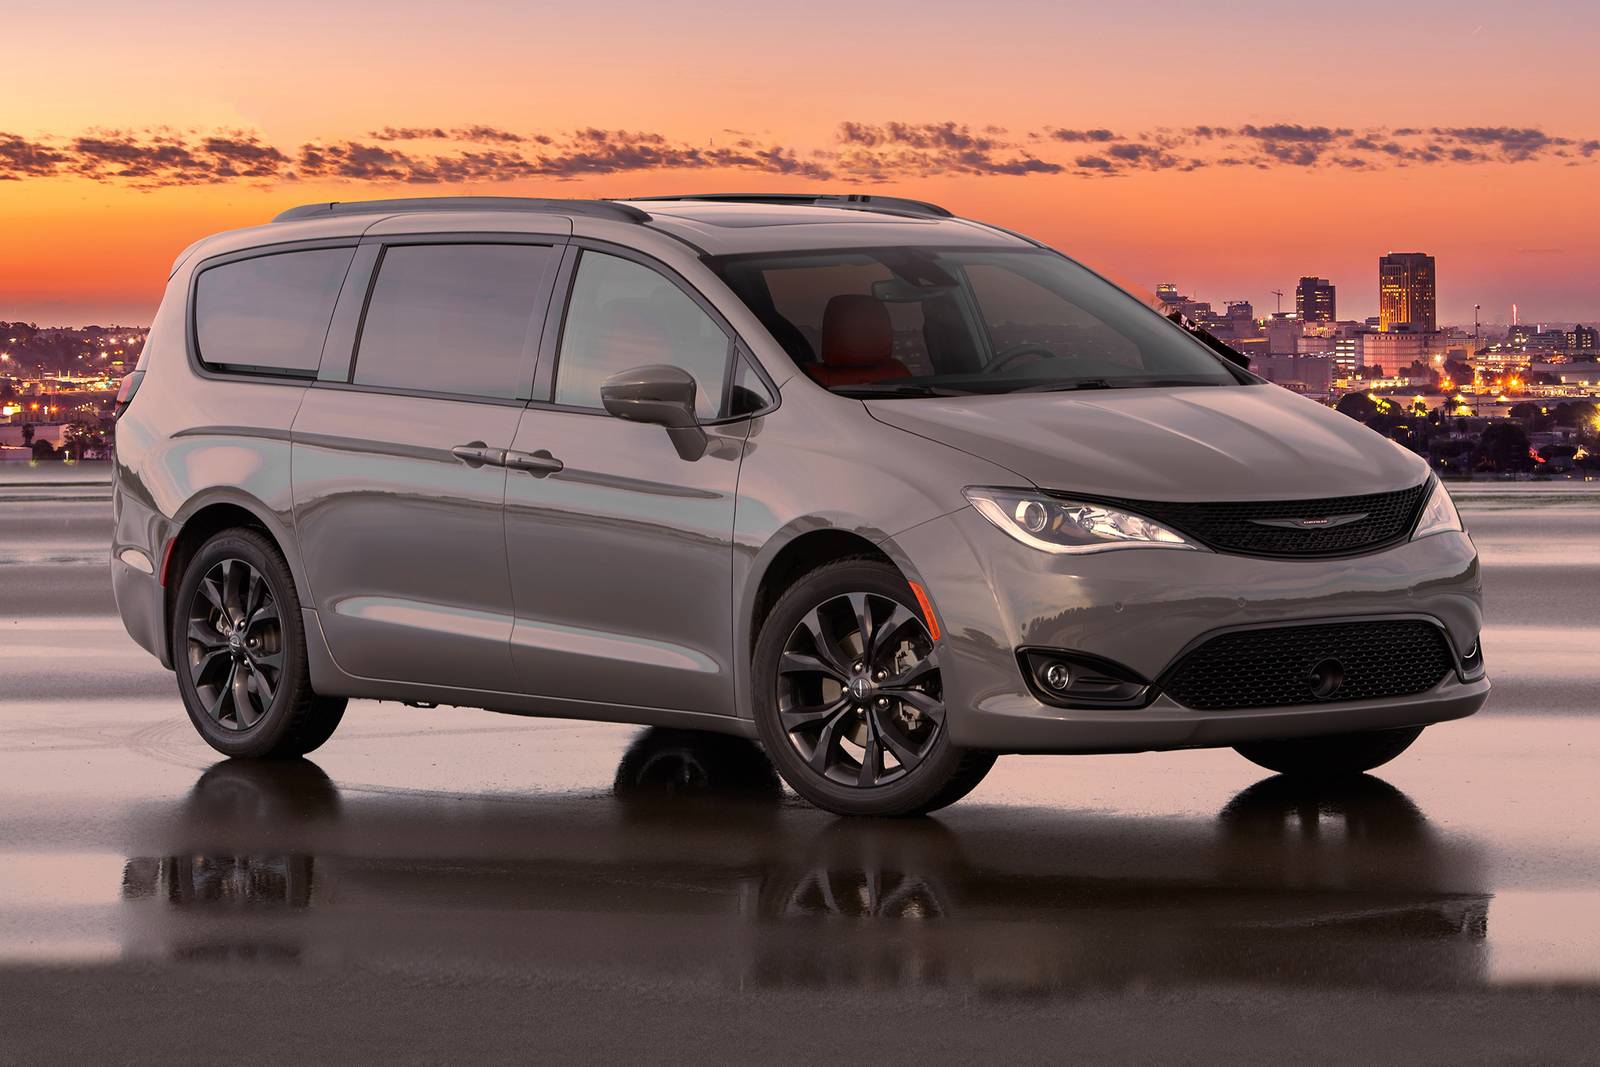 2020 Chrysler Pacifica Prices, Reviews 